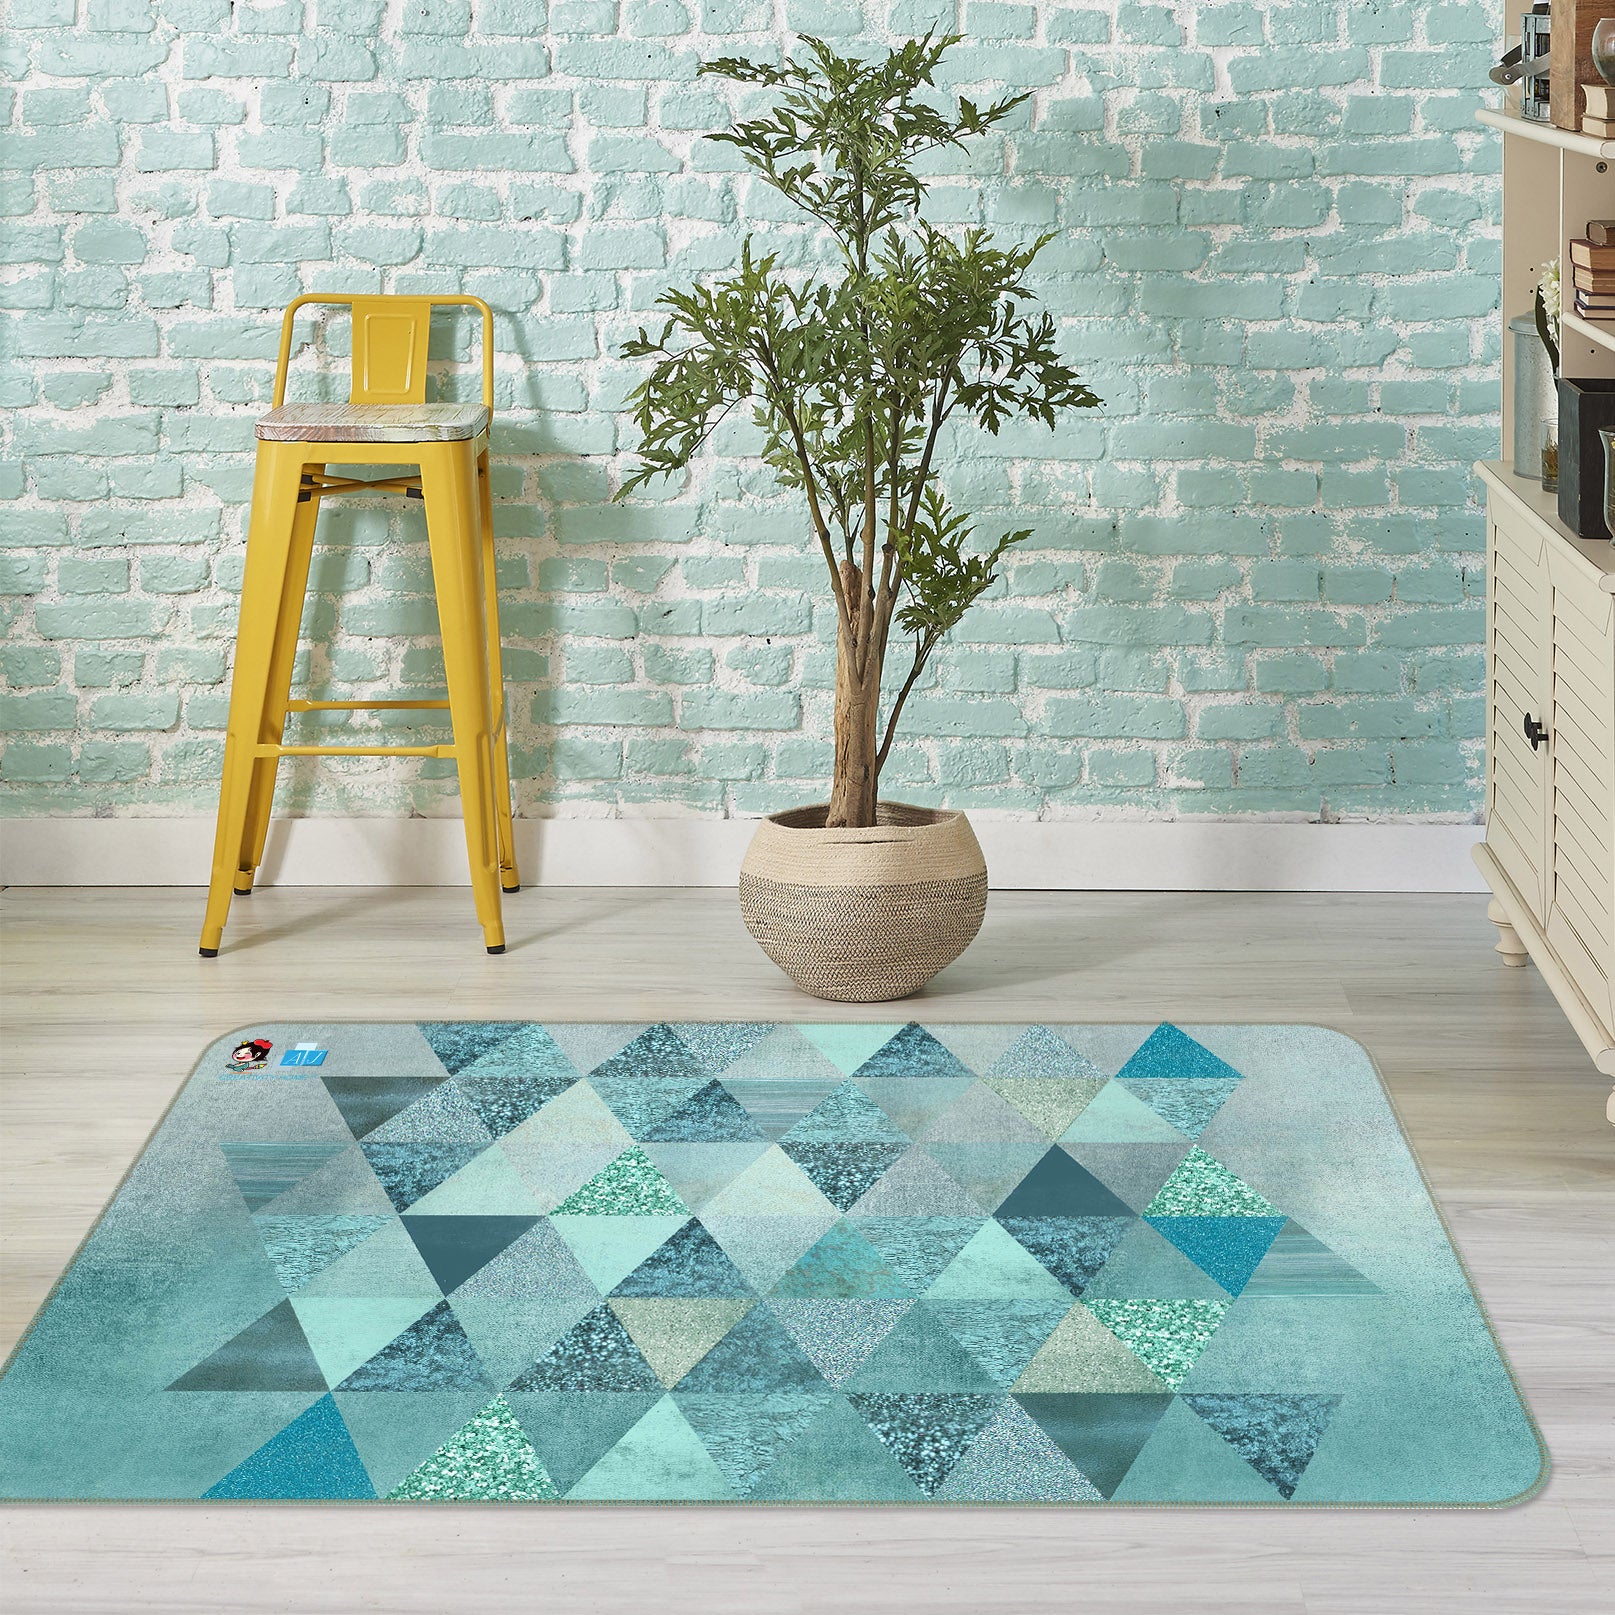 3D Triangle Pattern 83010 Andrea haase Rug Non Slip Rug Mat